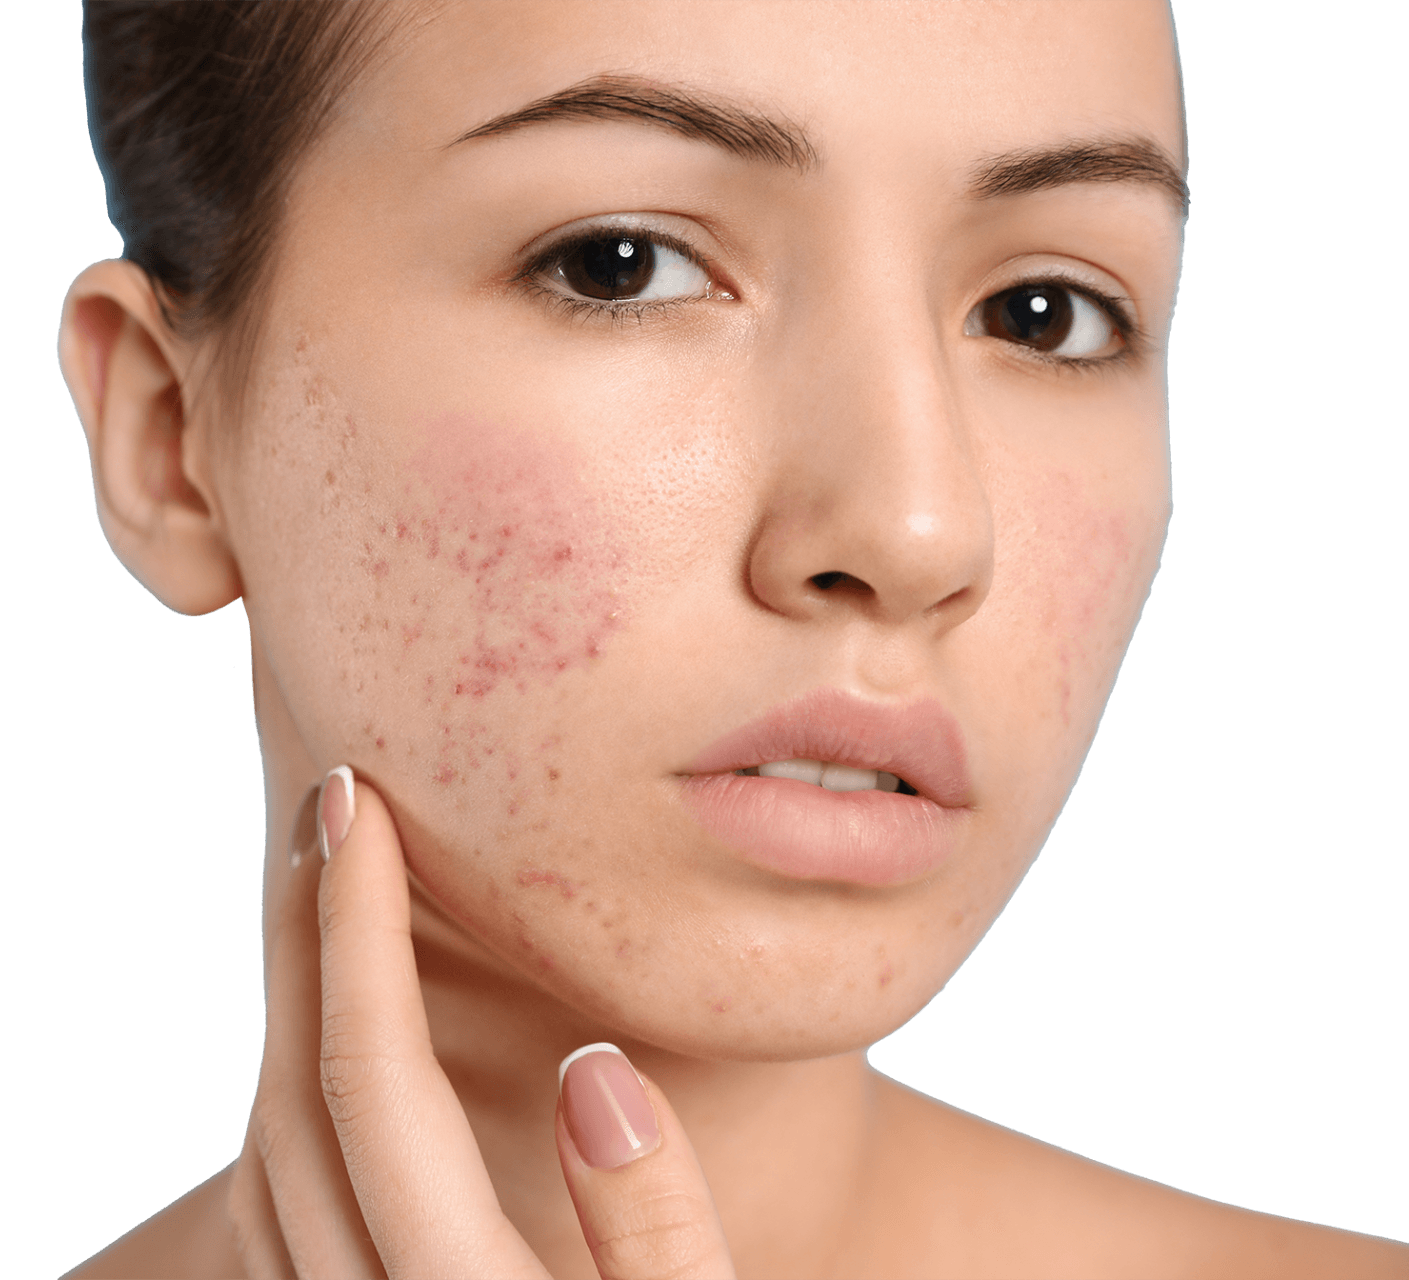 woman with acne on cheeks